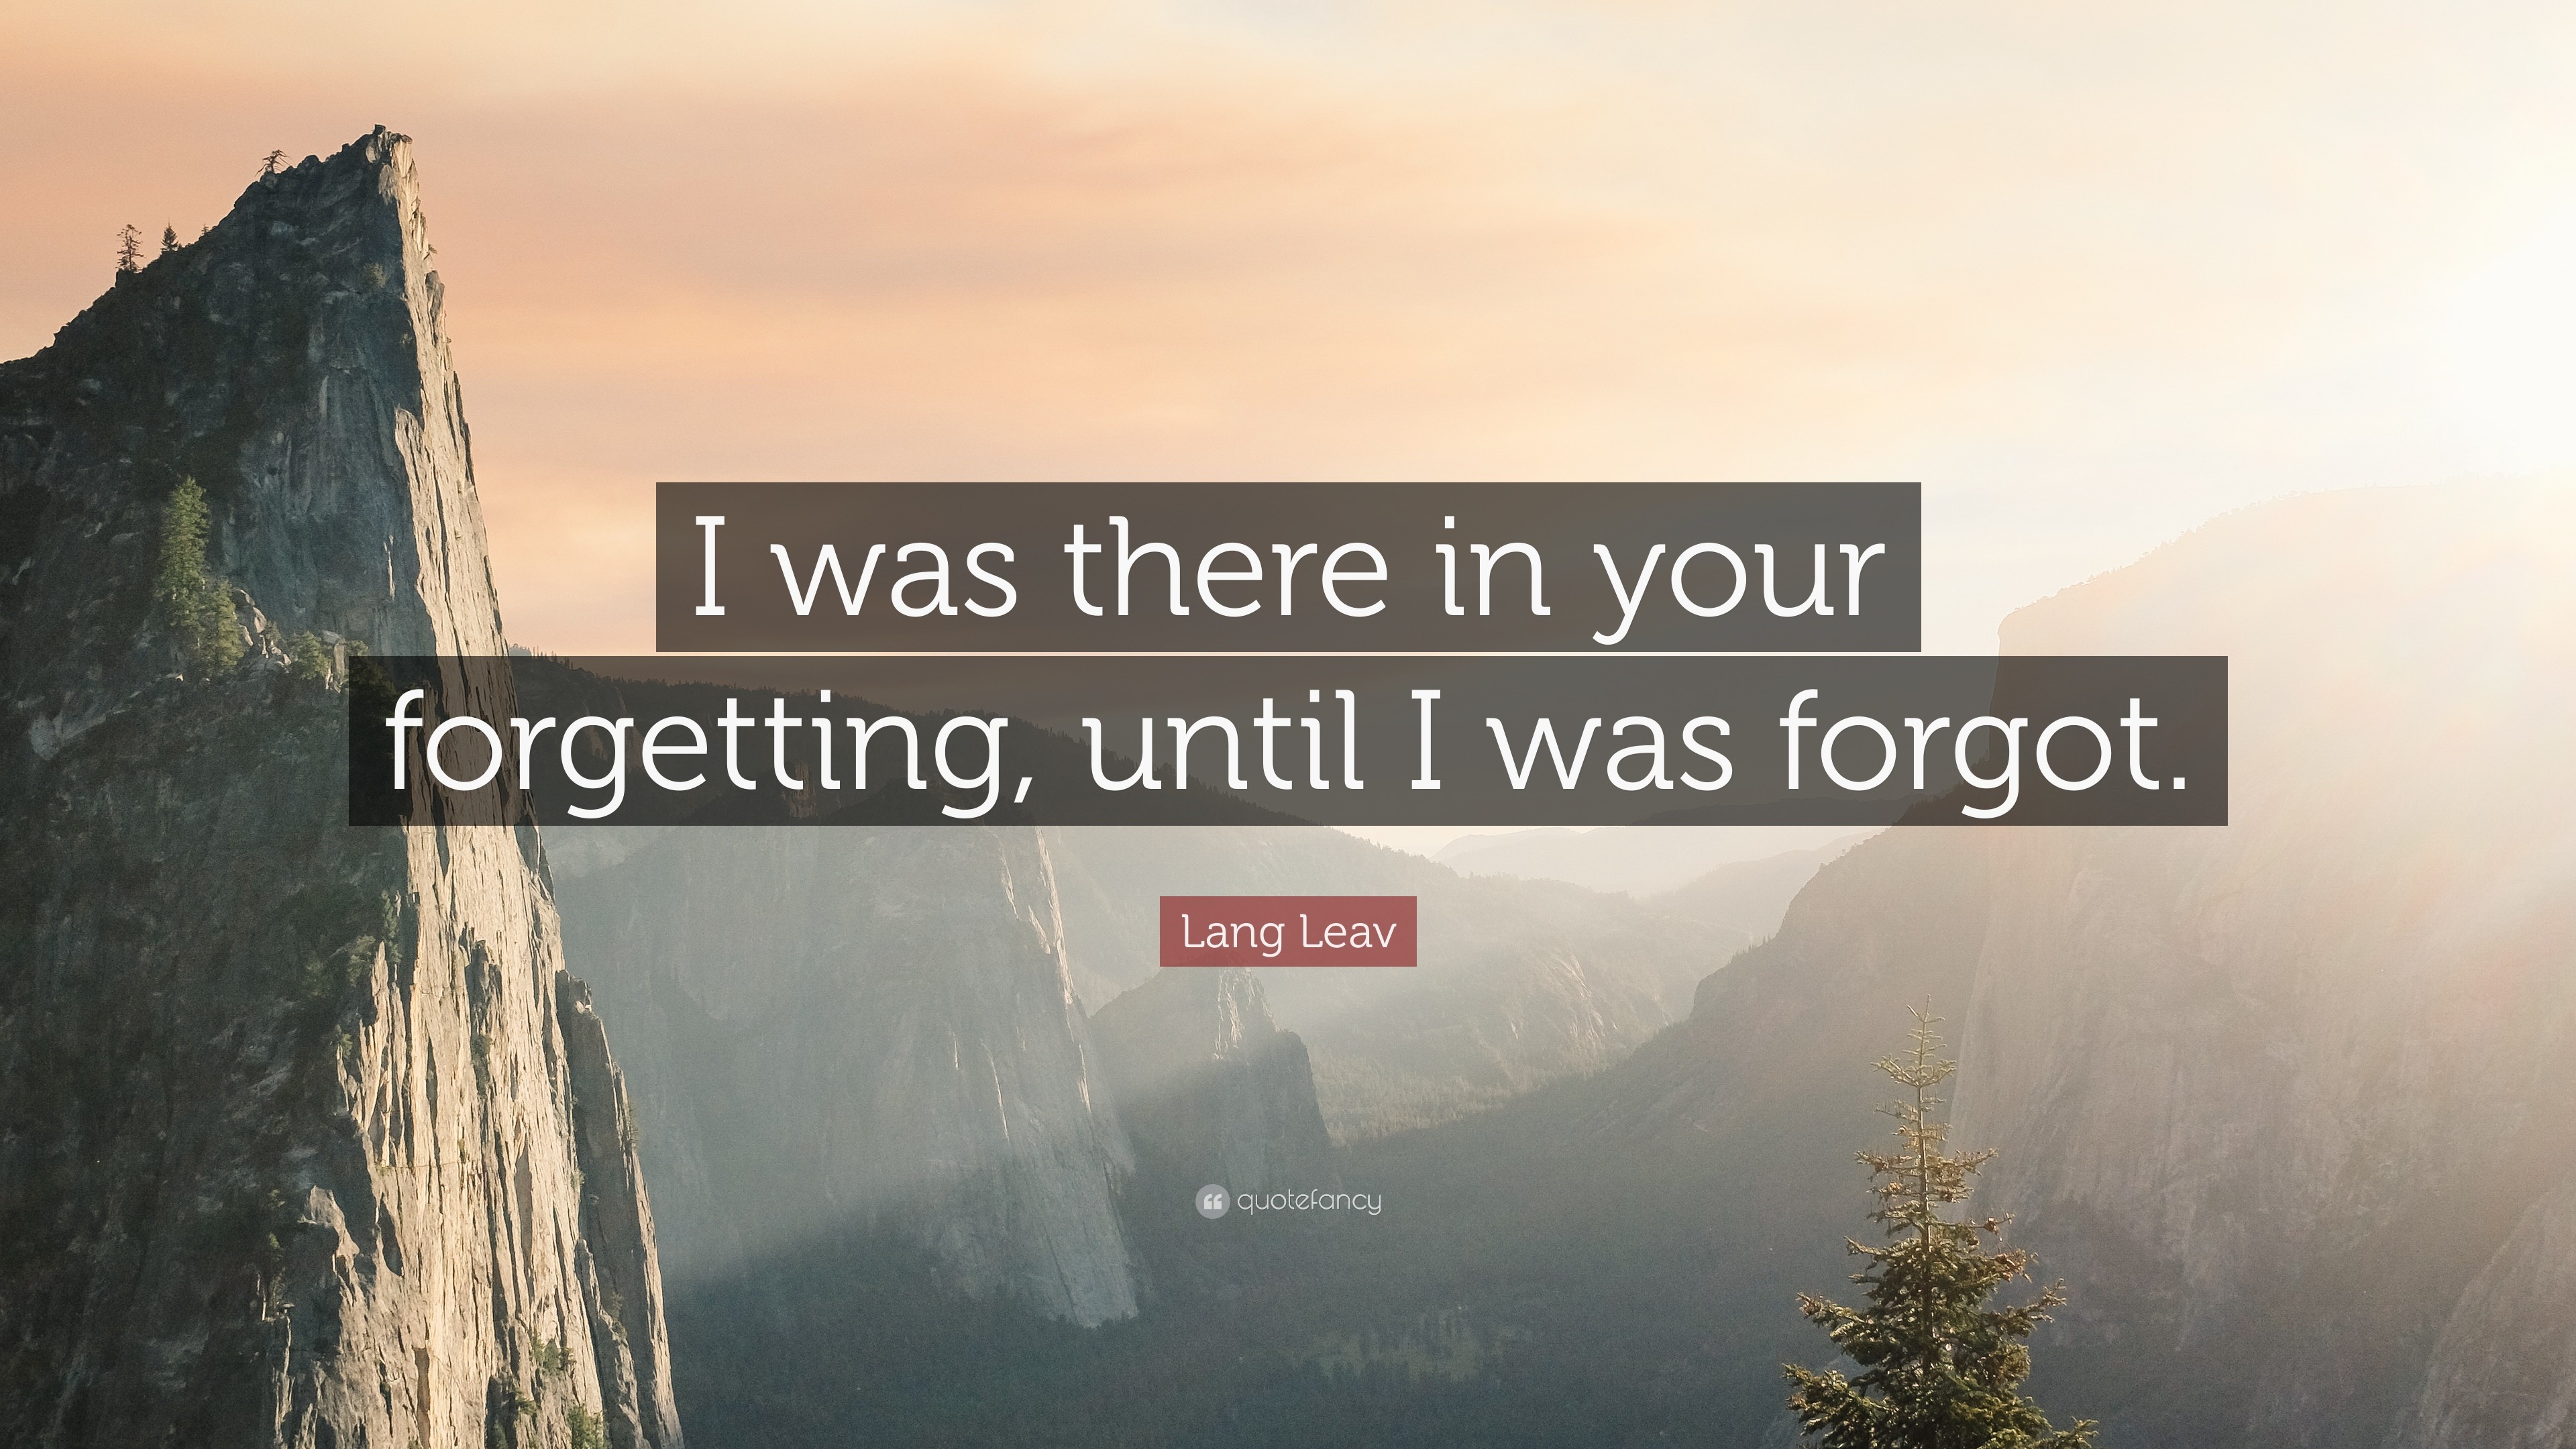 3840x2160 Lang Leav Quote: “I was there in your forgetting, until I was forgot